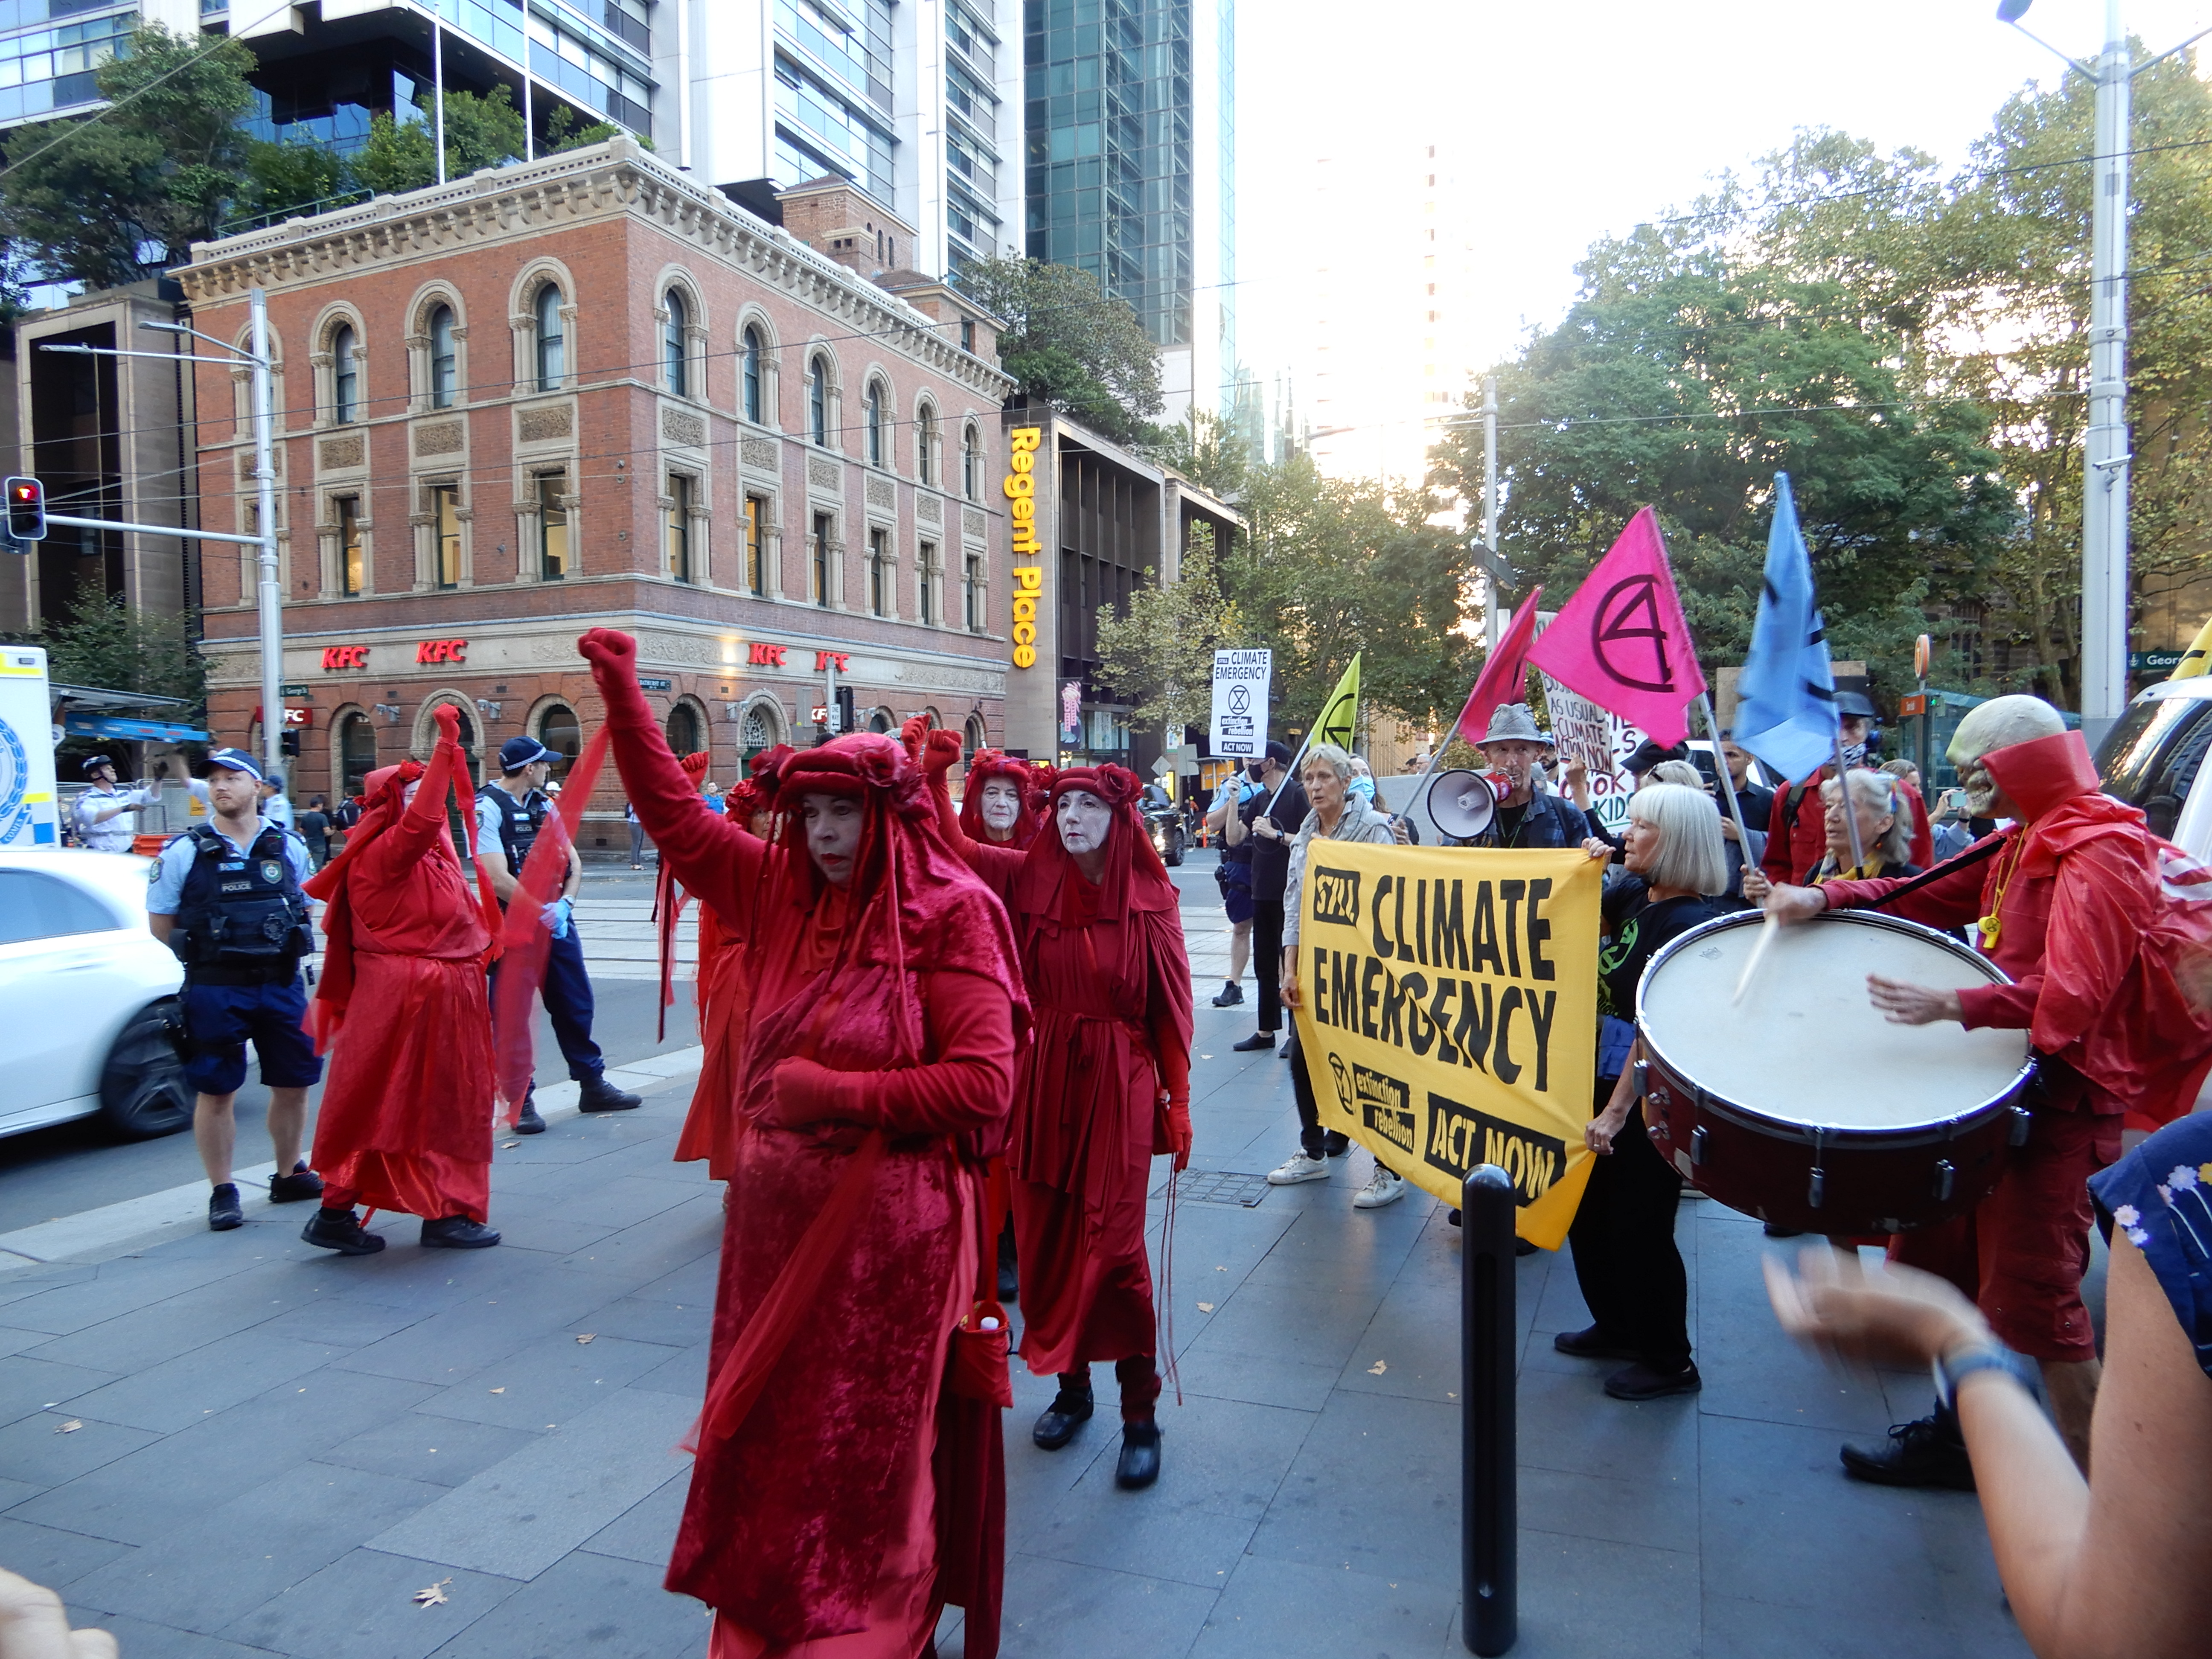 XR activists protest beside the nonviolent direct action